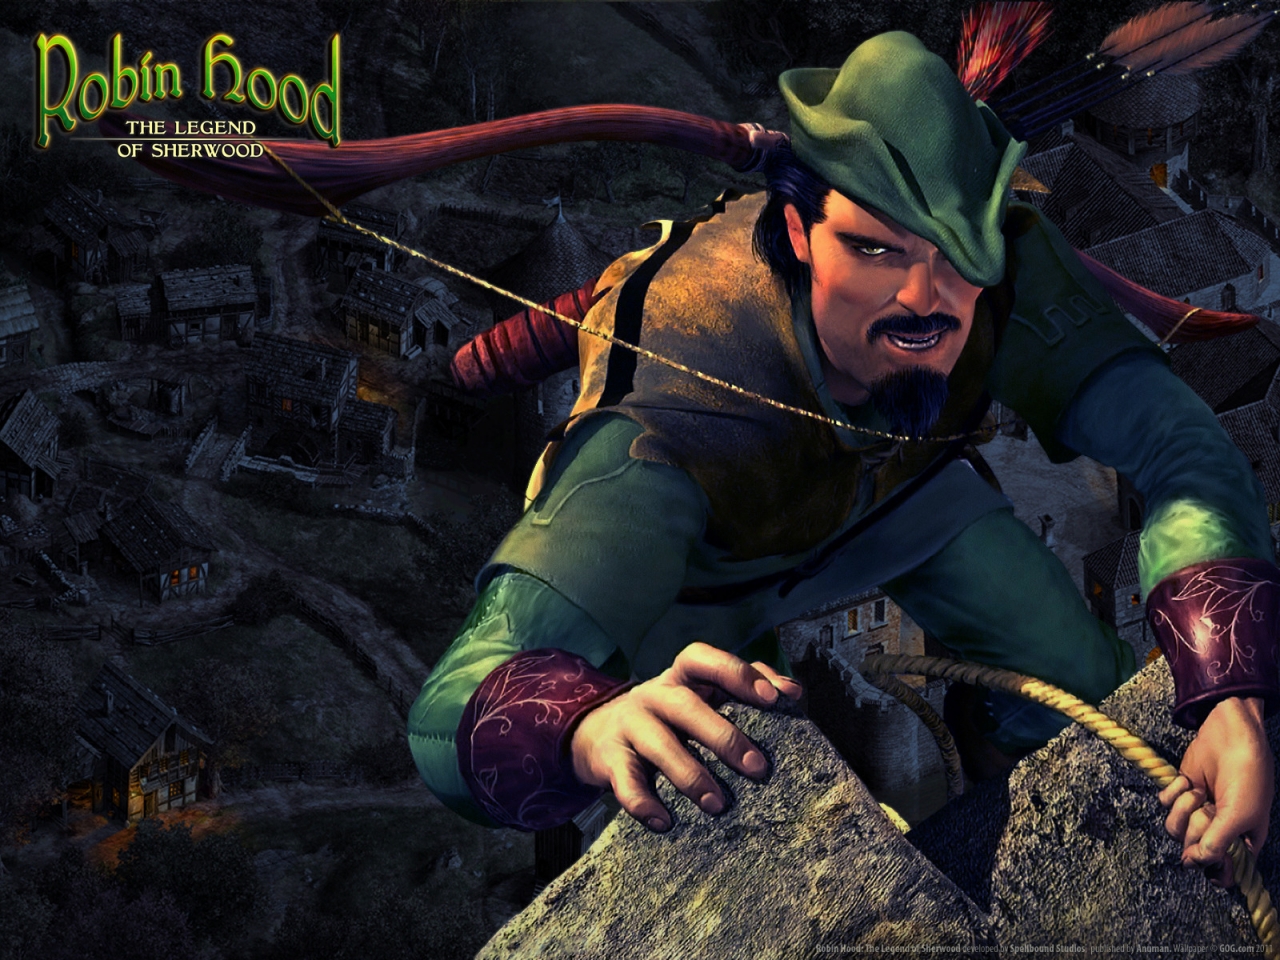 Robin Hood The Legend of Sherwood for 1280 x 960 resolution